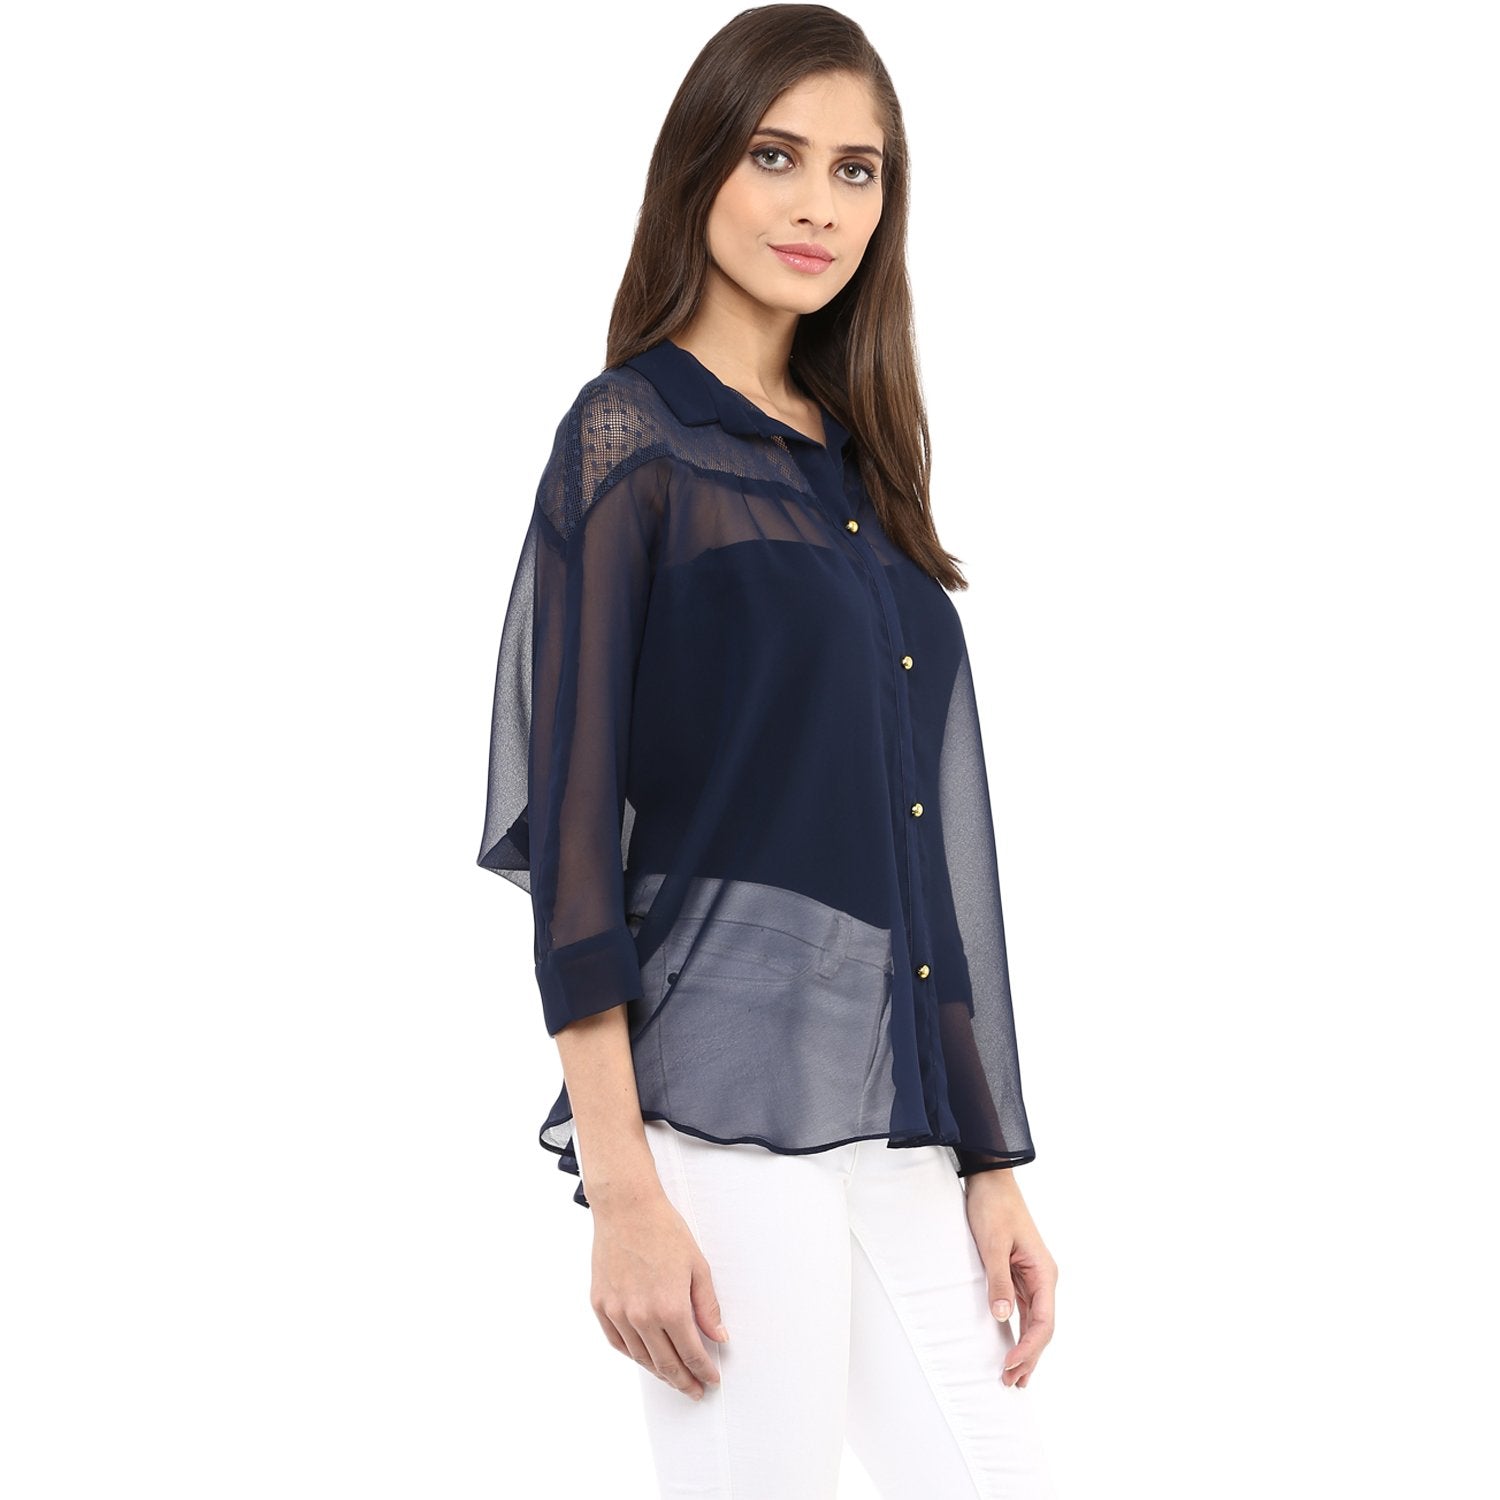 Women's Dotted Hippy Top - Pannkh